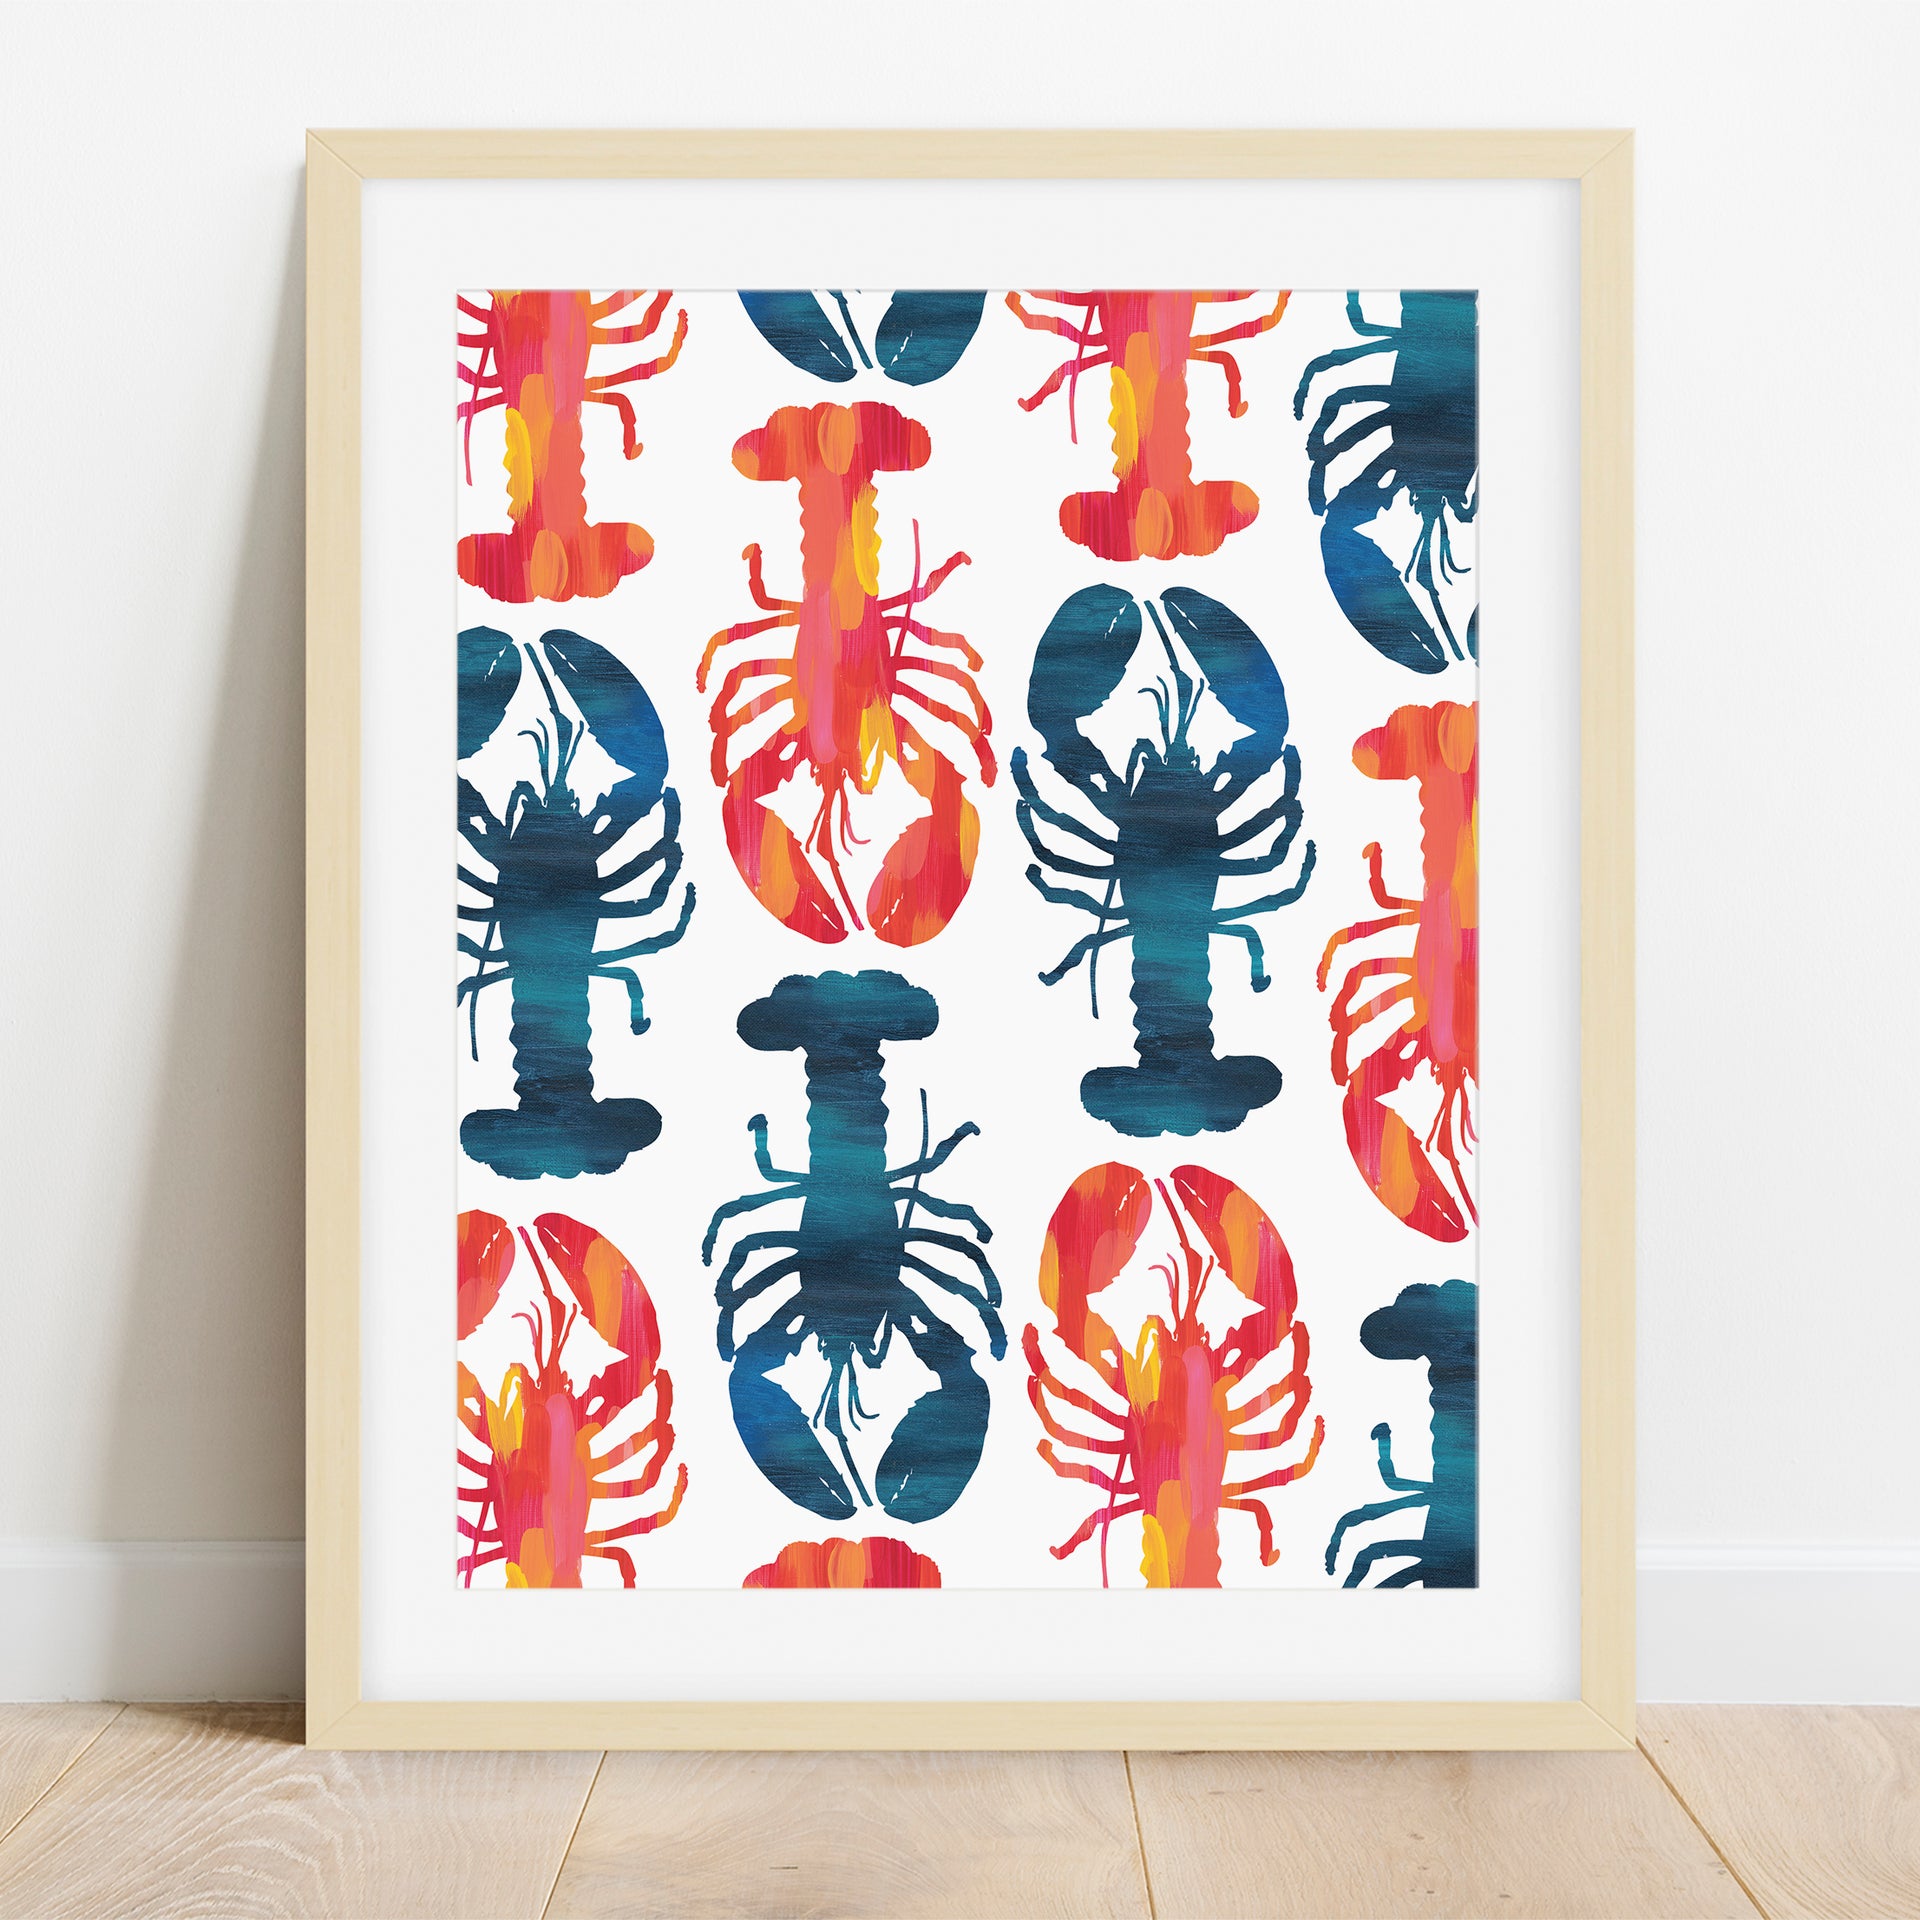 Bright Blue & Pink Lobster Print by Gert & Co